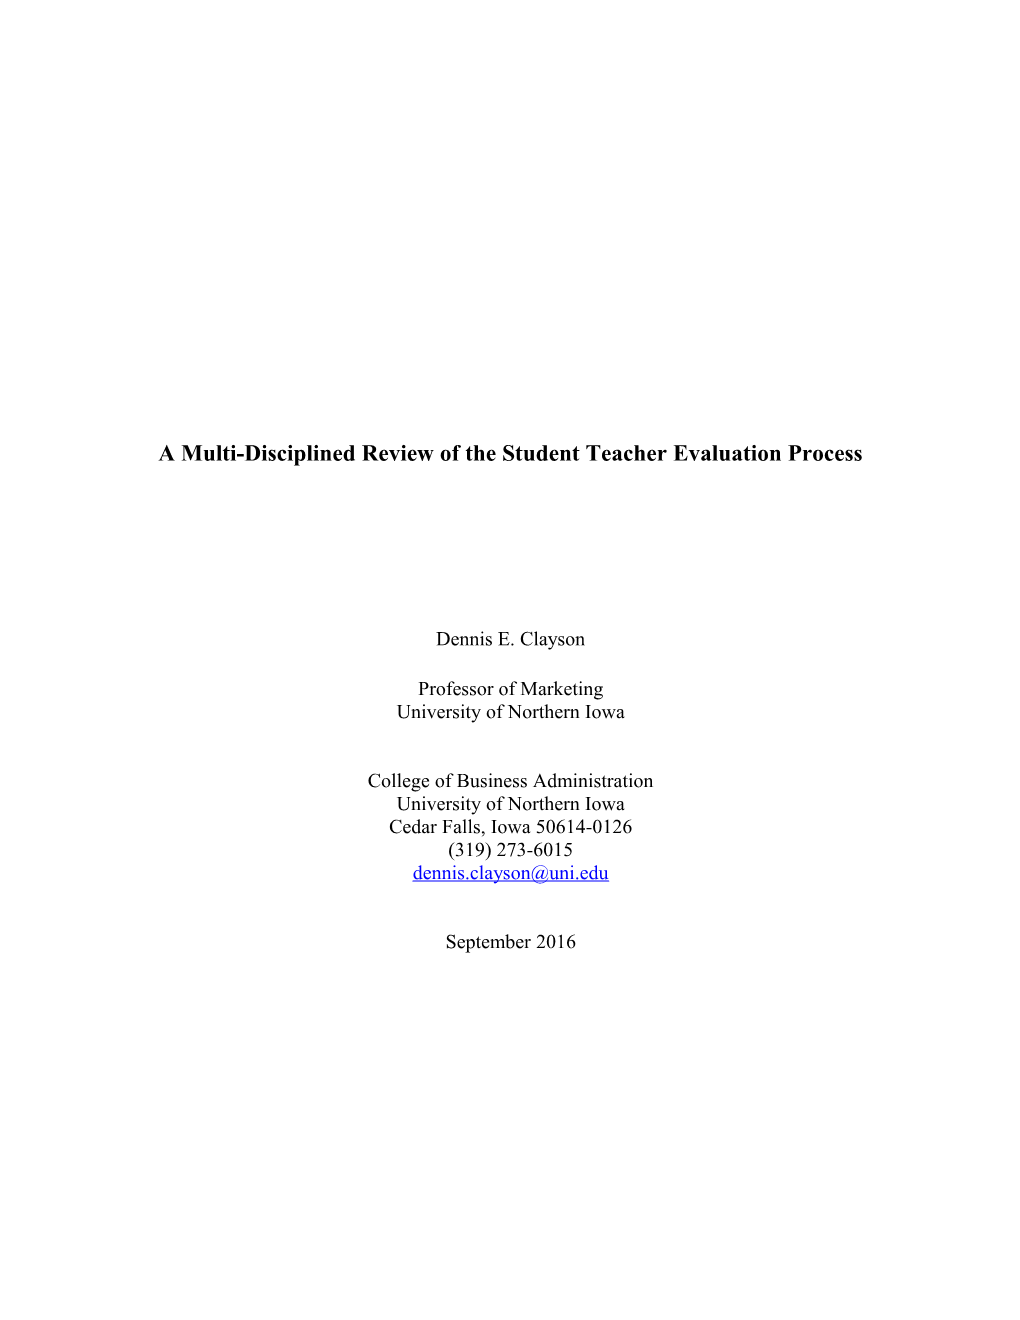 Myths and Counter-Myths of the Student Teacher Evaluation Process